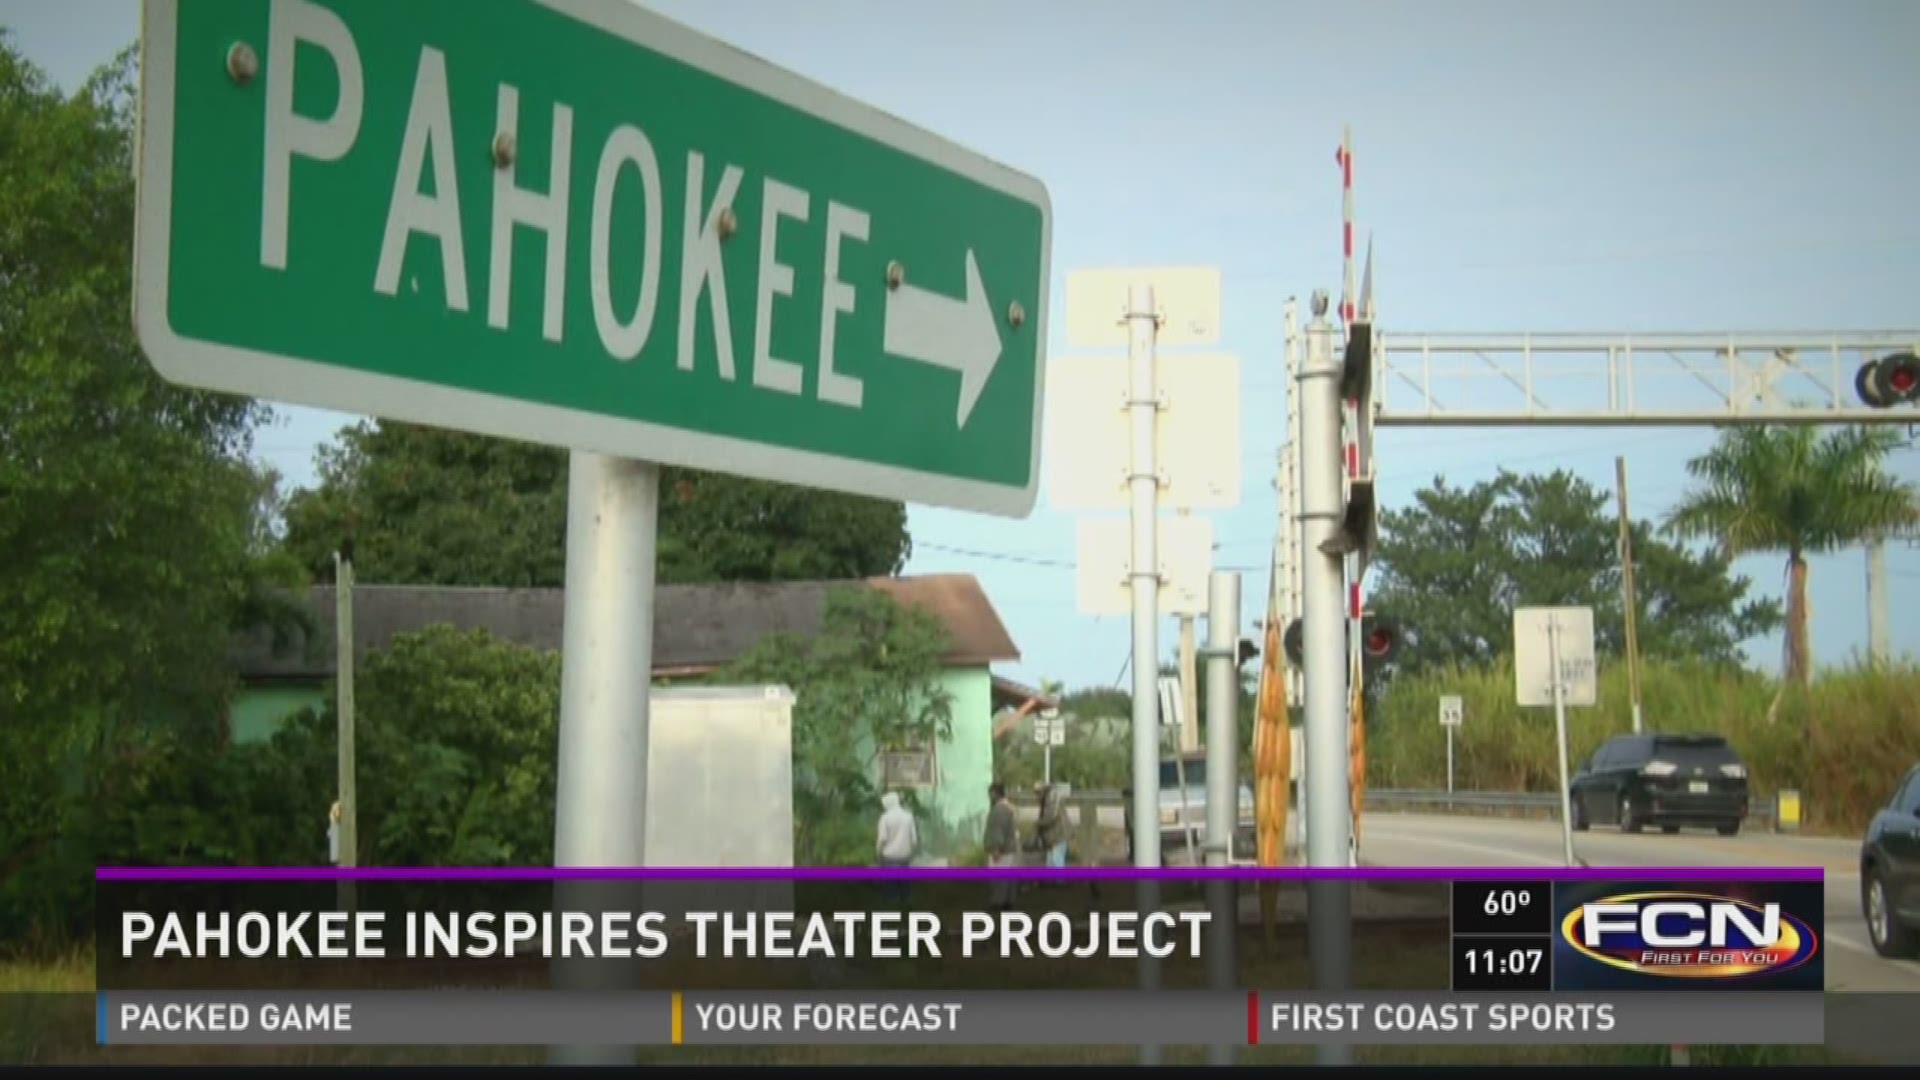 Pahokee inspires theater project